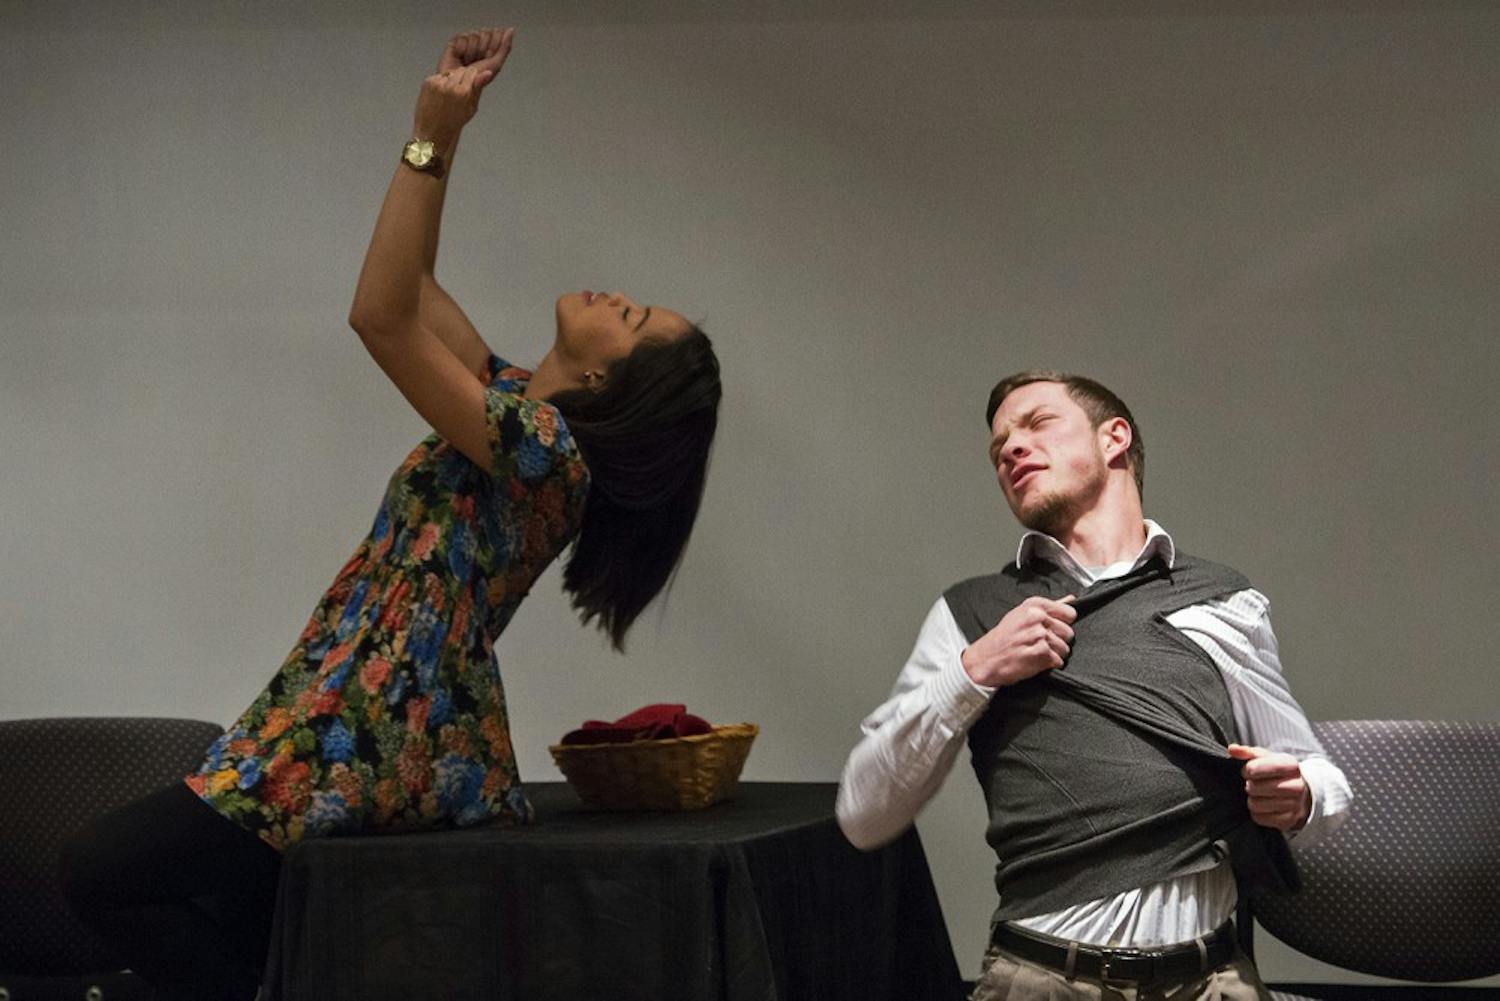 Cara Pugh, left, and Noah Boyd perform a skit on gender roles Monday evening for "What Are You Looking At?," a performance and facilitated discussion program about media literacy and body image issues across gender and race.